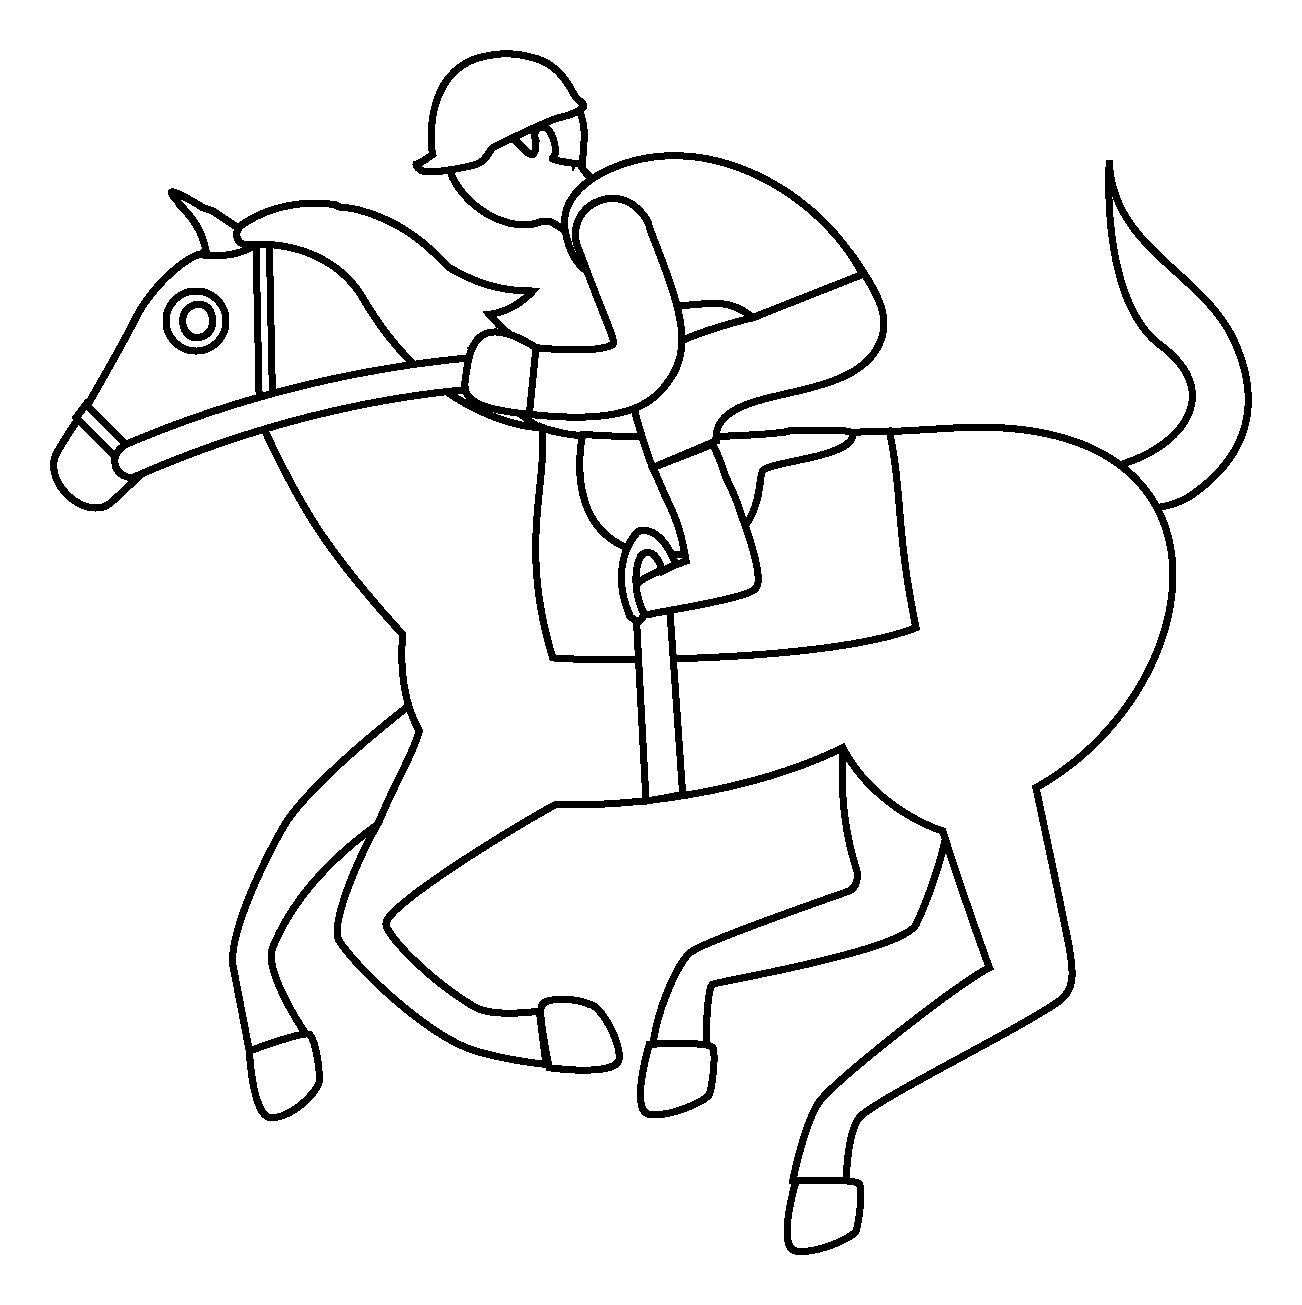 Perfect race horse coloring page